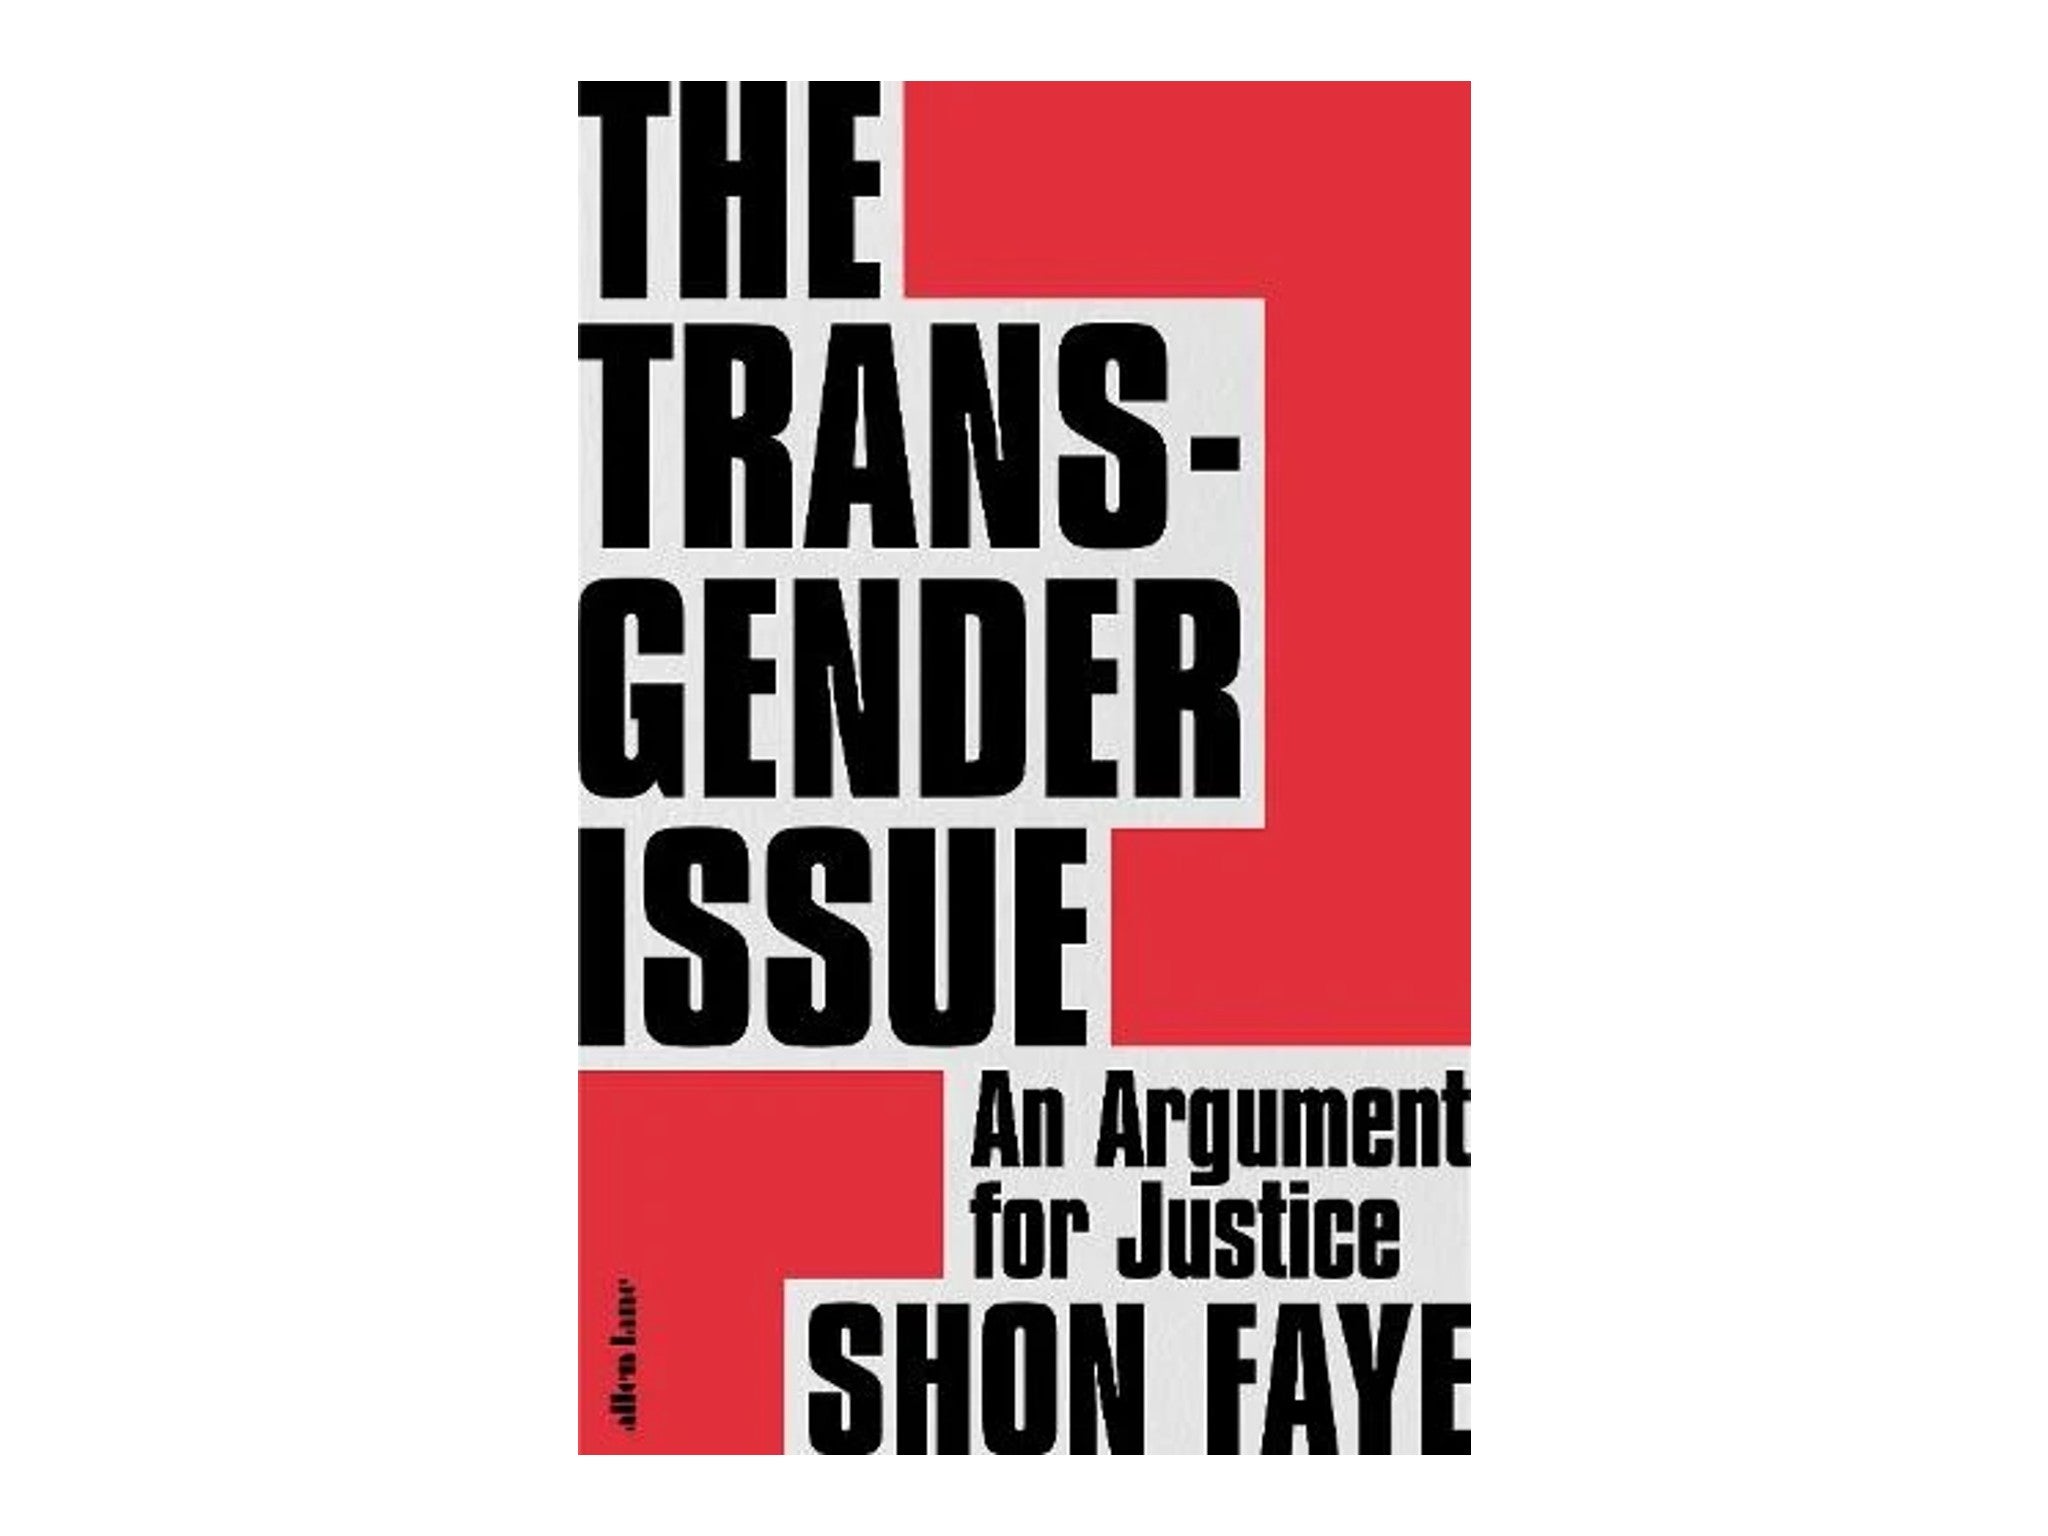 ‘The Transgender Issue’ by Shon Faye, published by Penguin indybest.jpg